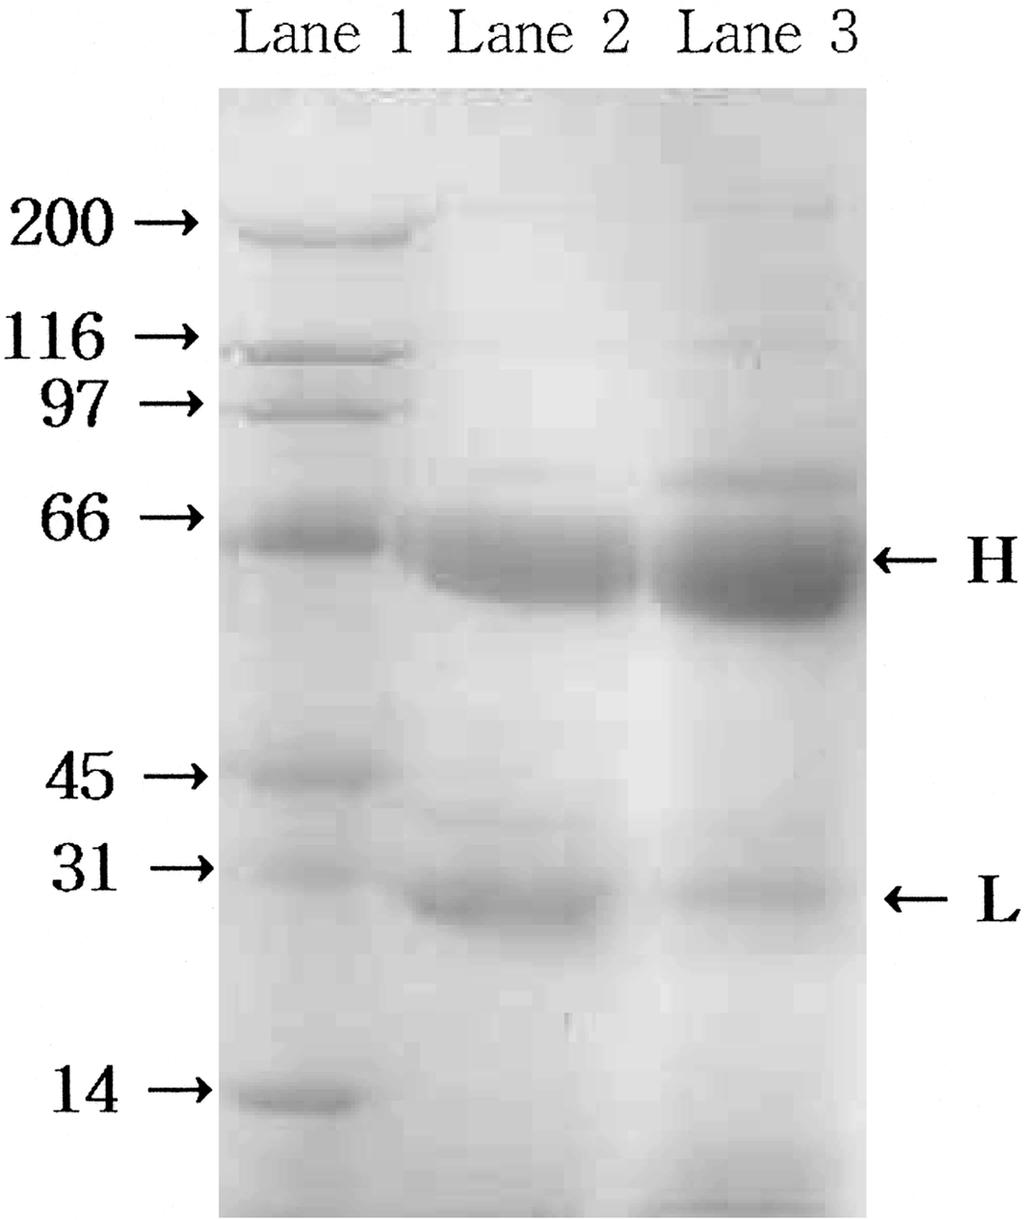 64 8PO#P4IJNFUBM Fig. 3. Anti-LPS IgY titratin f LPS immunized hen (IgY was diluted as 1,000 ). Fig. 2. SDS-PAGE patterns f purified IgY frm egg ylk.